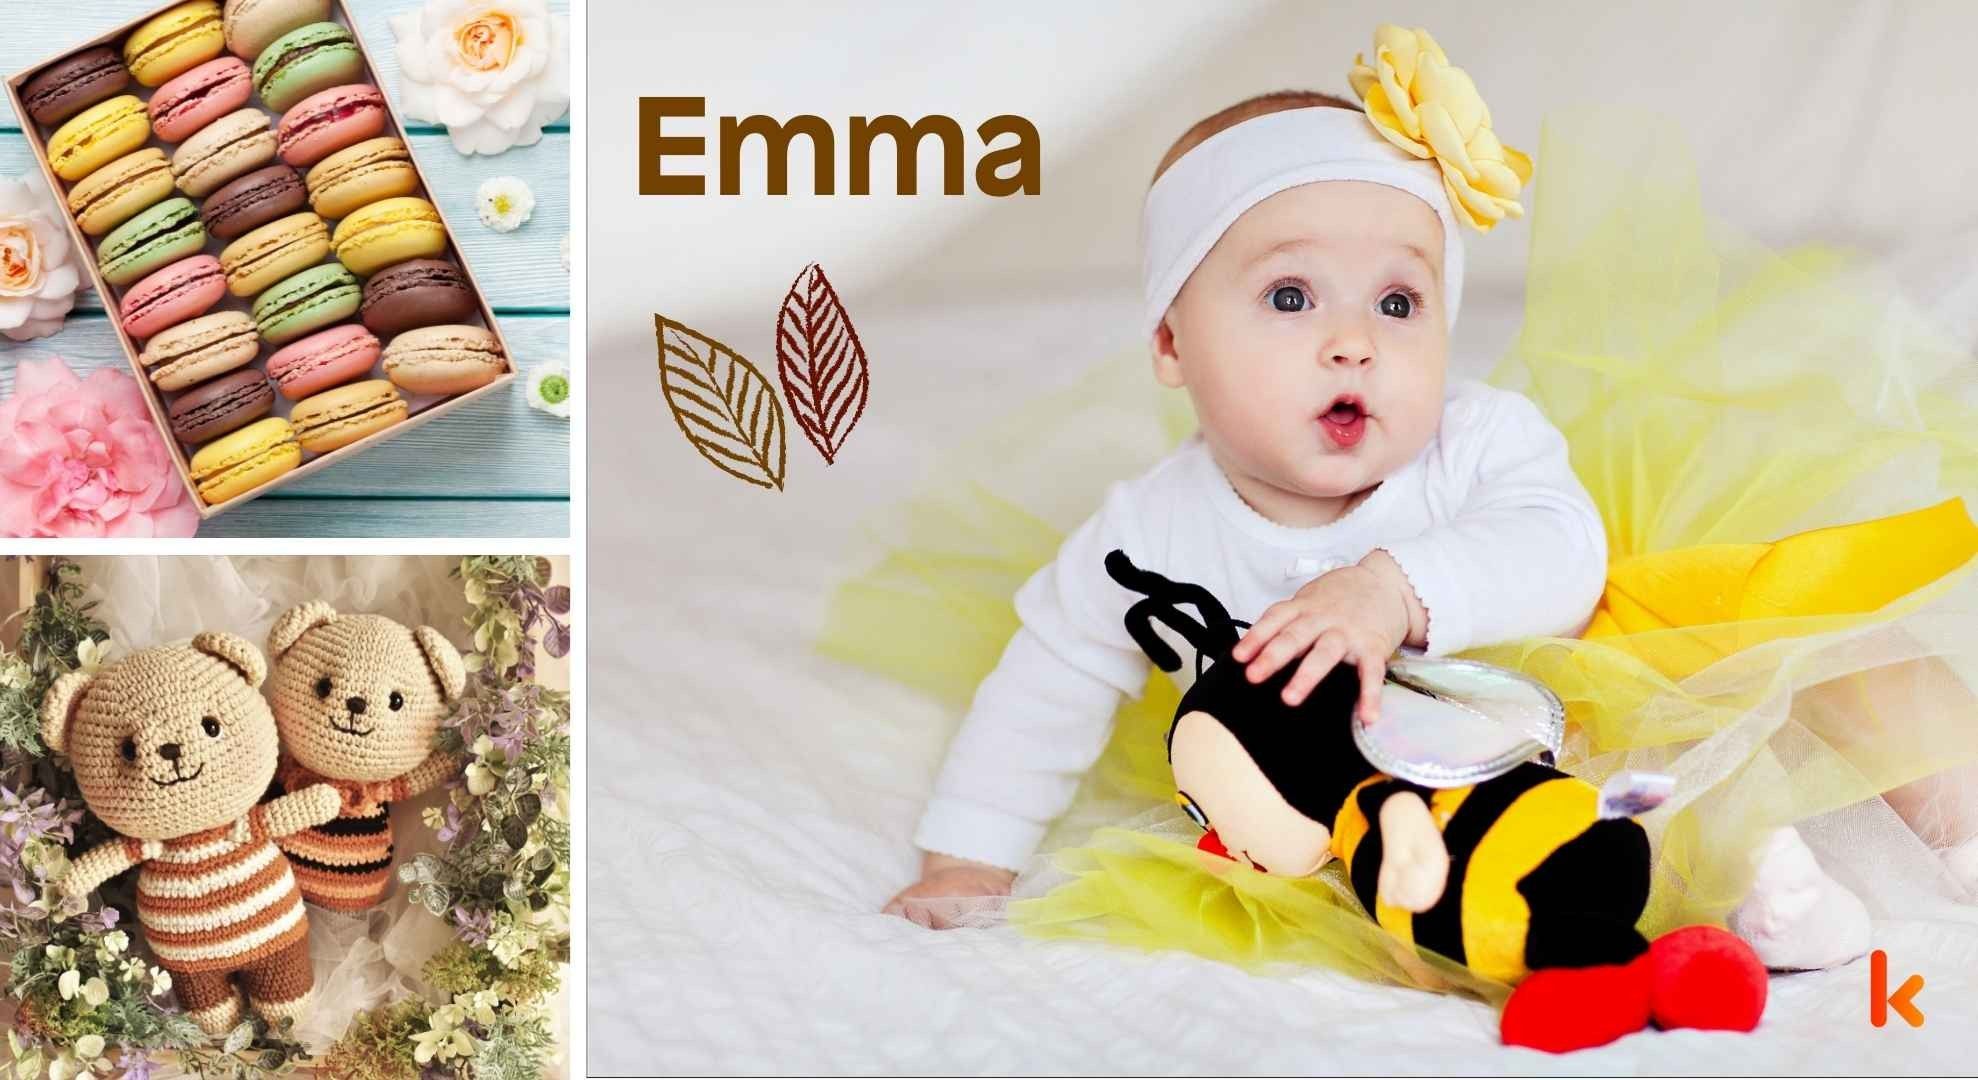 Meaning of the name Emma